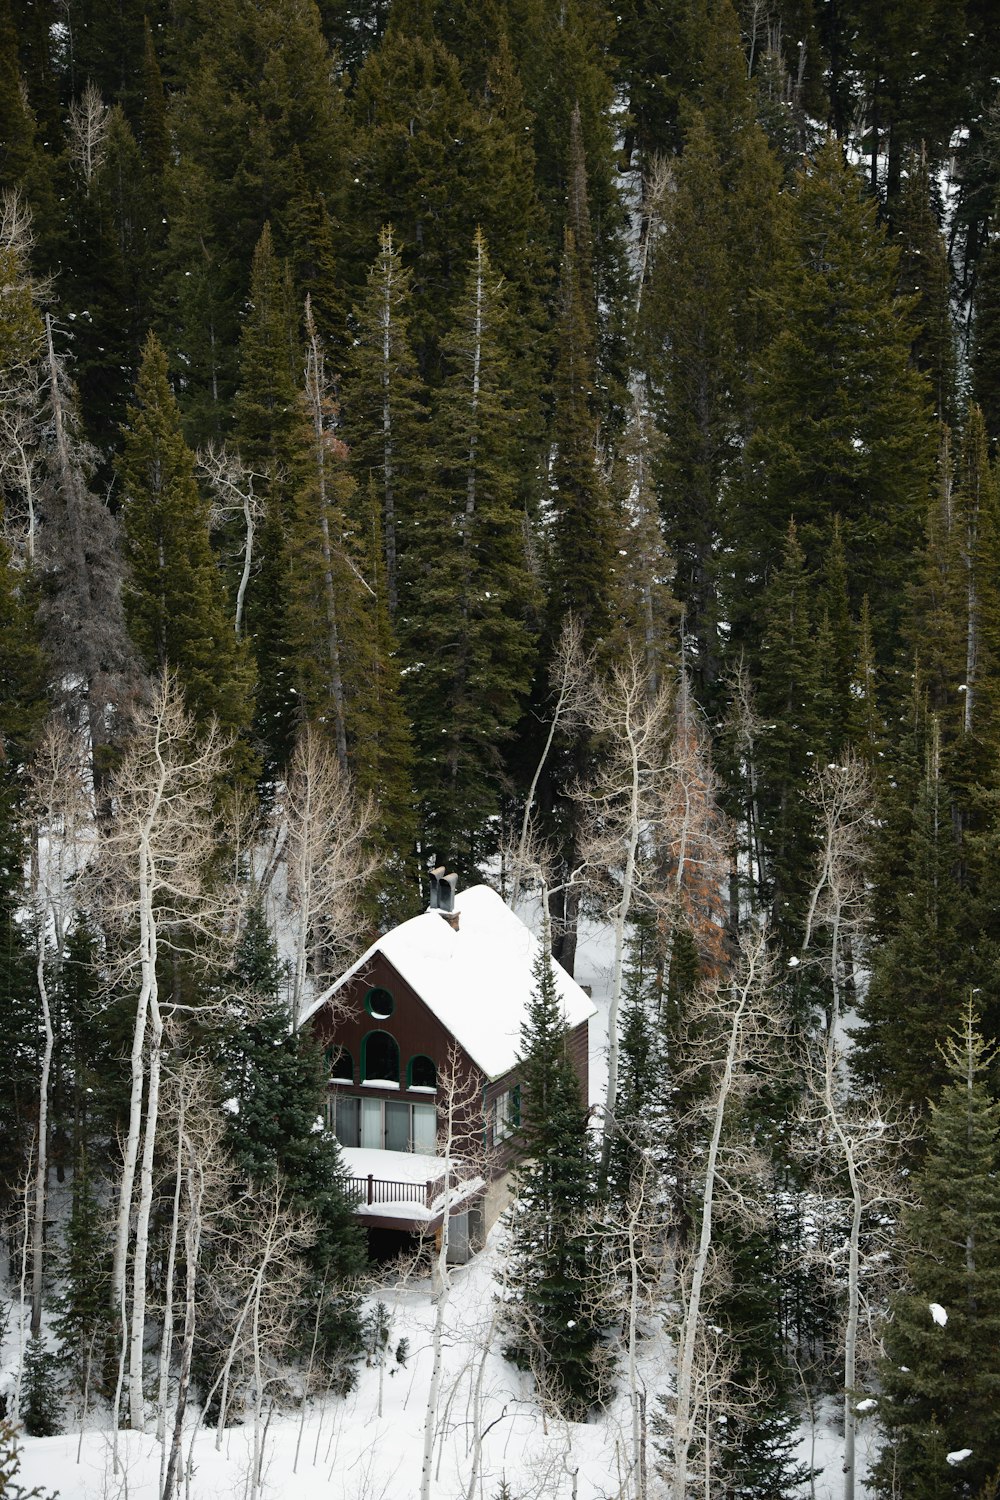 white and brown wooden house in the middle of forest